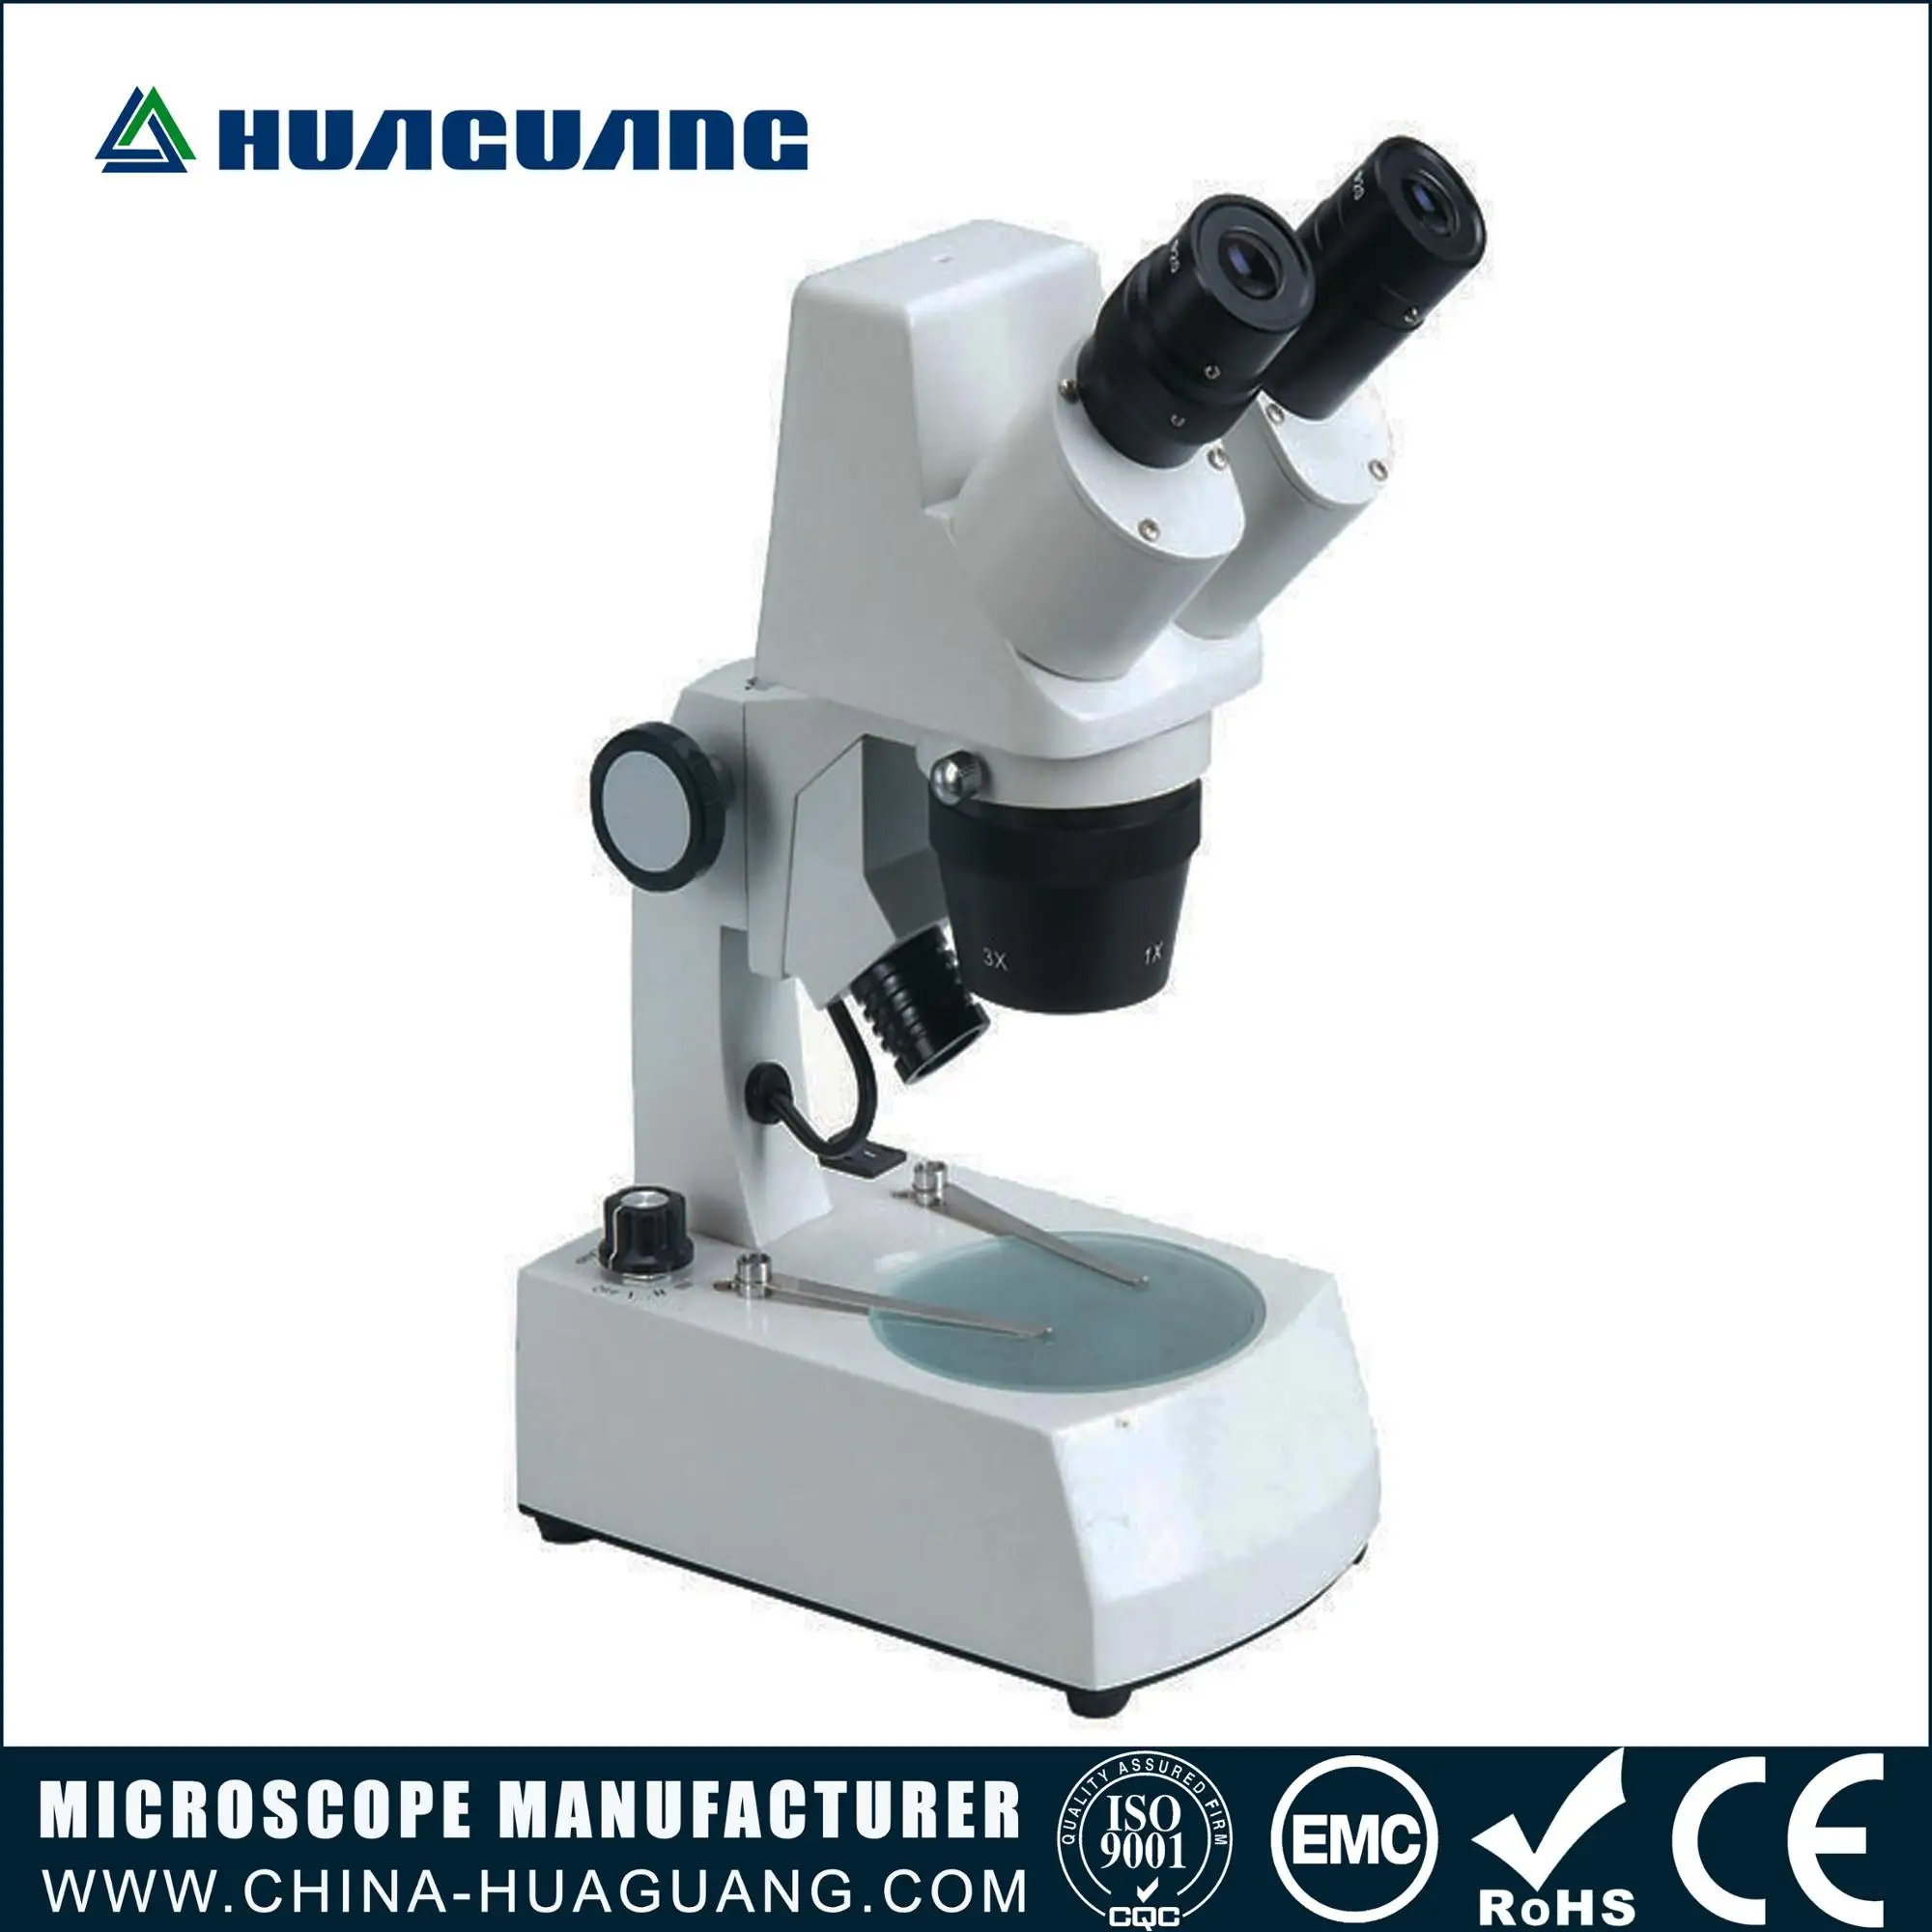 Eastcolight Microscope Software Download